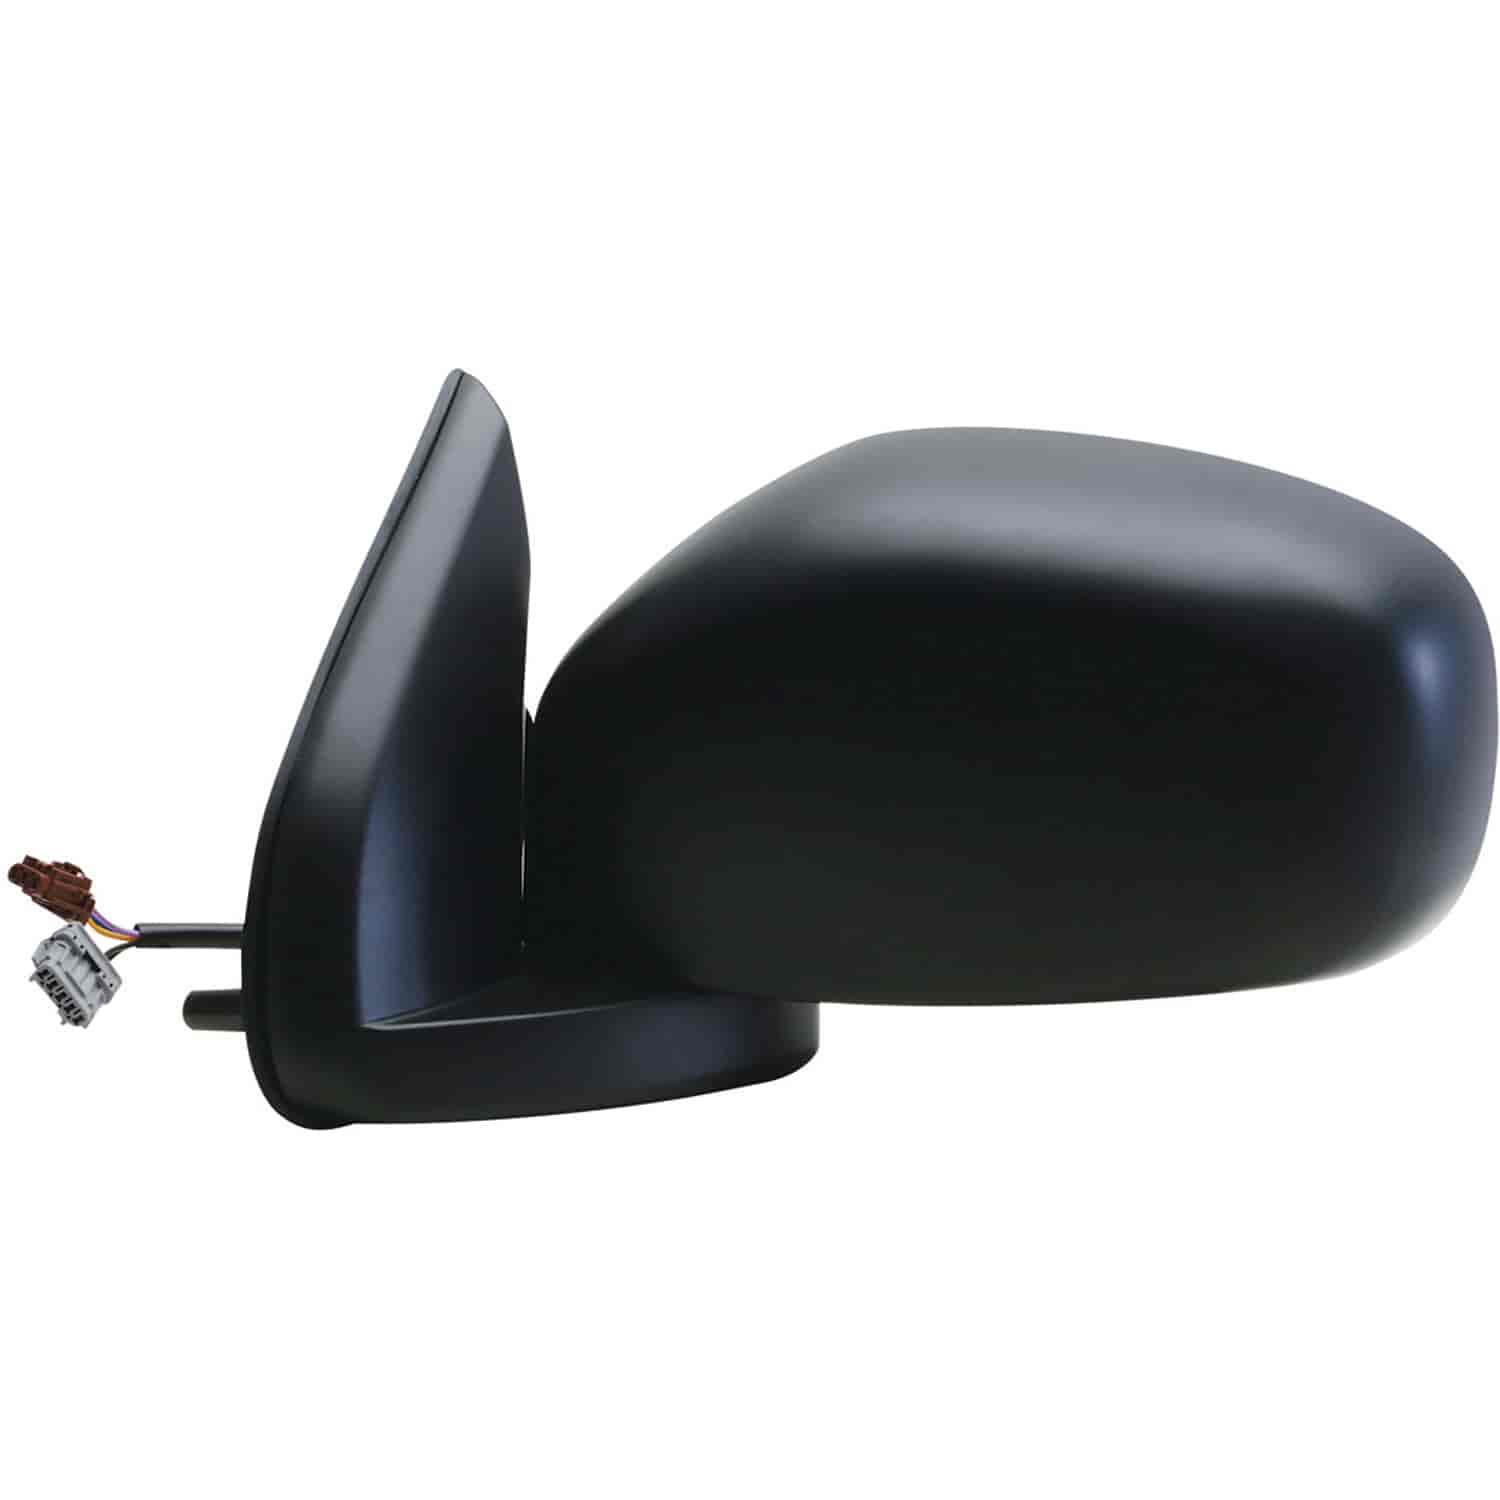 OEM Style Replacement mirror for 96-99 Nissan Pathfinder driver side mirror tested to fit and functi